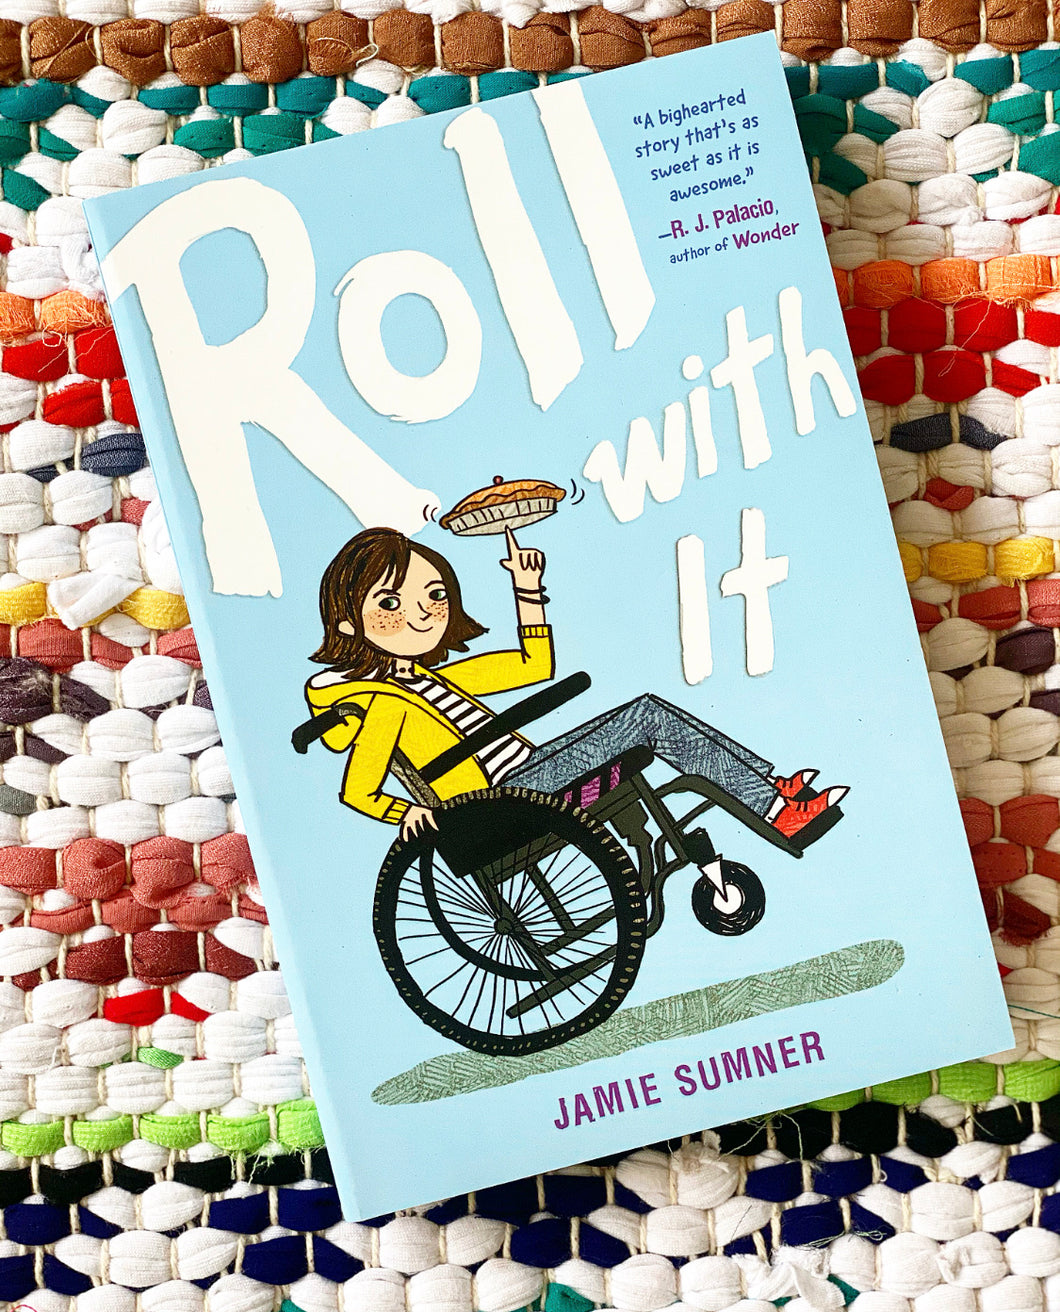 Roll With It [paperback] | Jamie Sumner